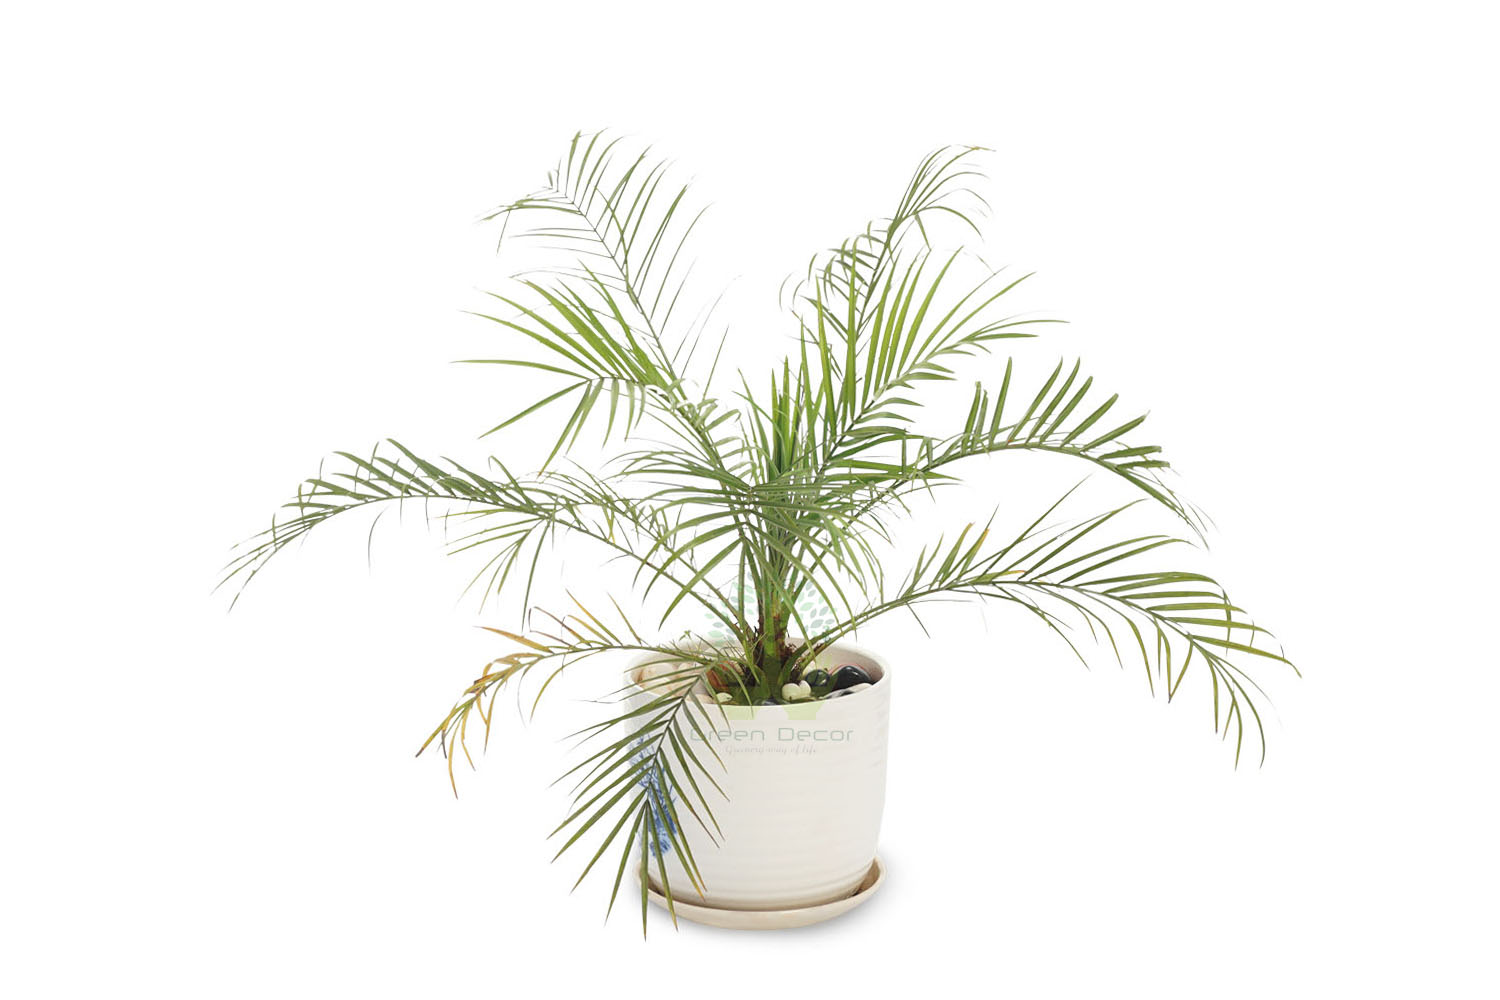 Buy Dwarf Date Palm Plants , White Pots and seeds in Delhi NCR by the best online nursery shop Greendecor.